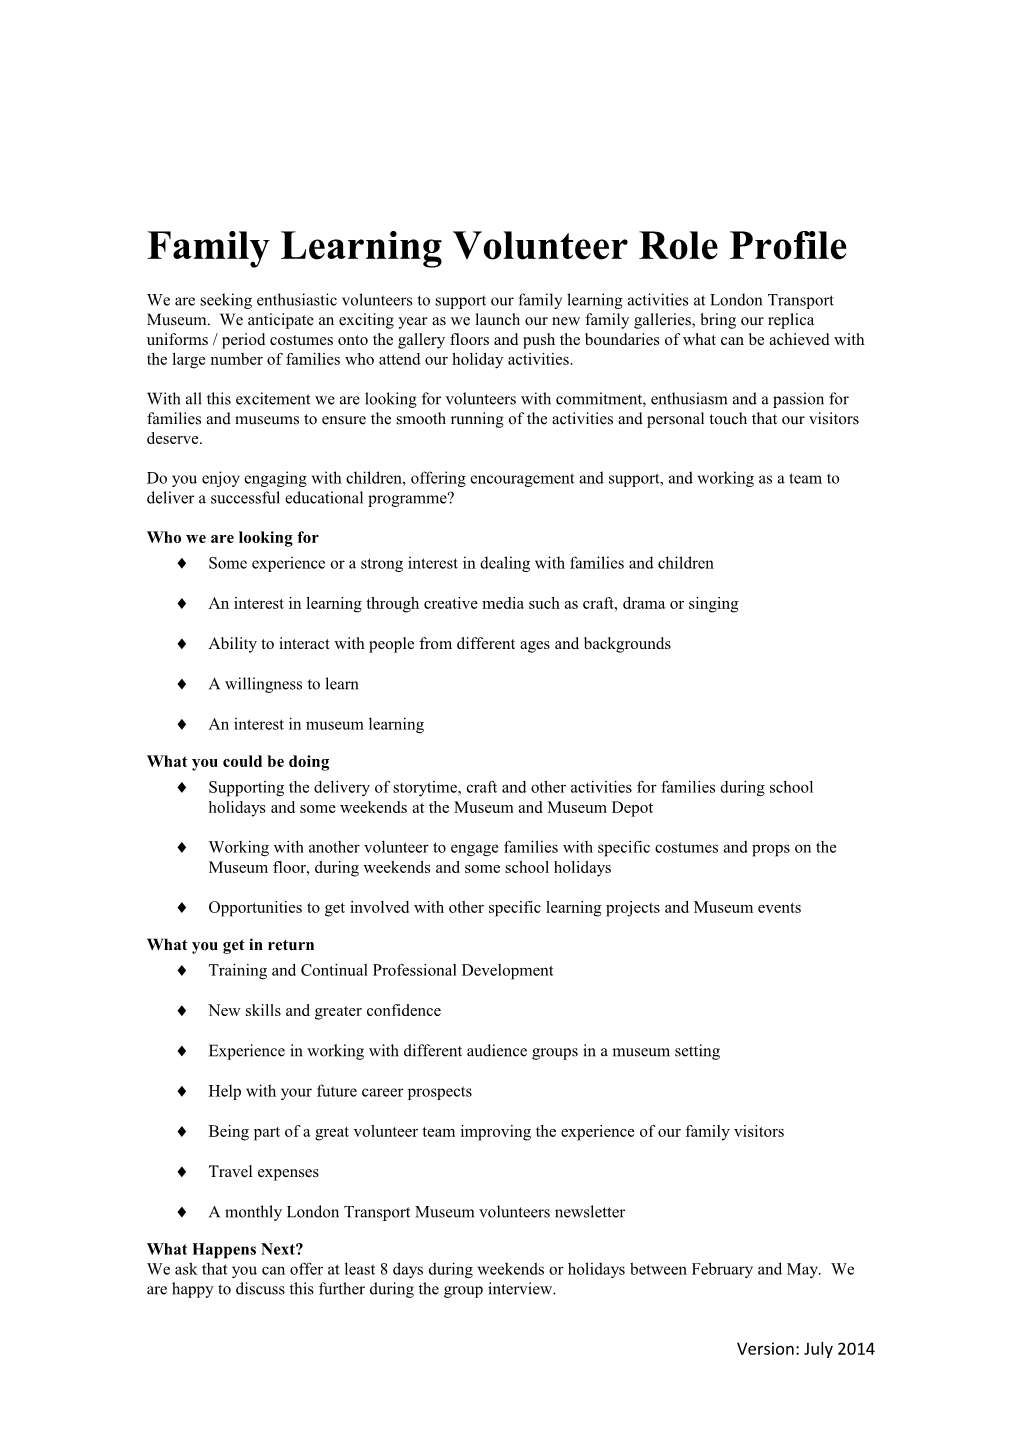 Family Learning Volunteer Role Profile